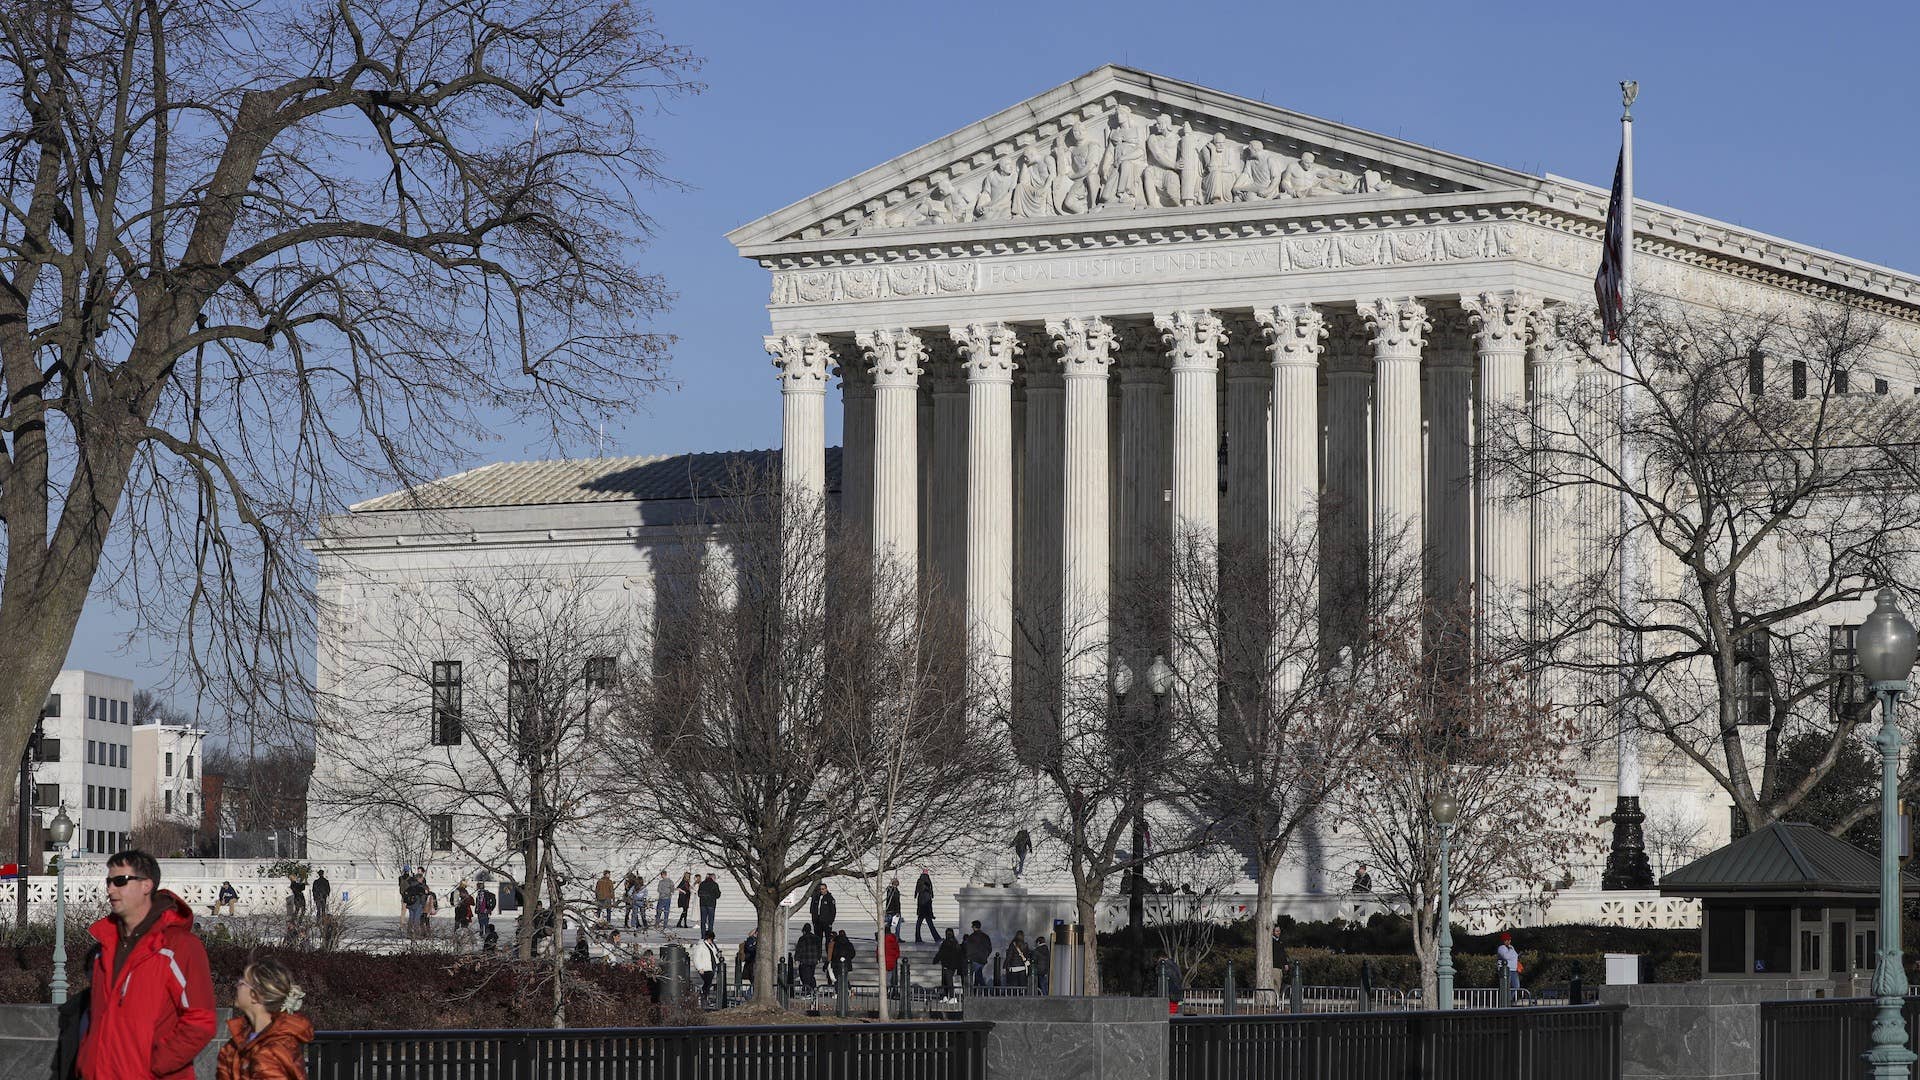 The Supreme Court of the United States building are seen in Washington D.C.